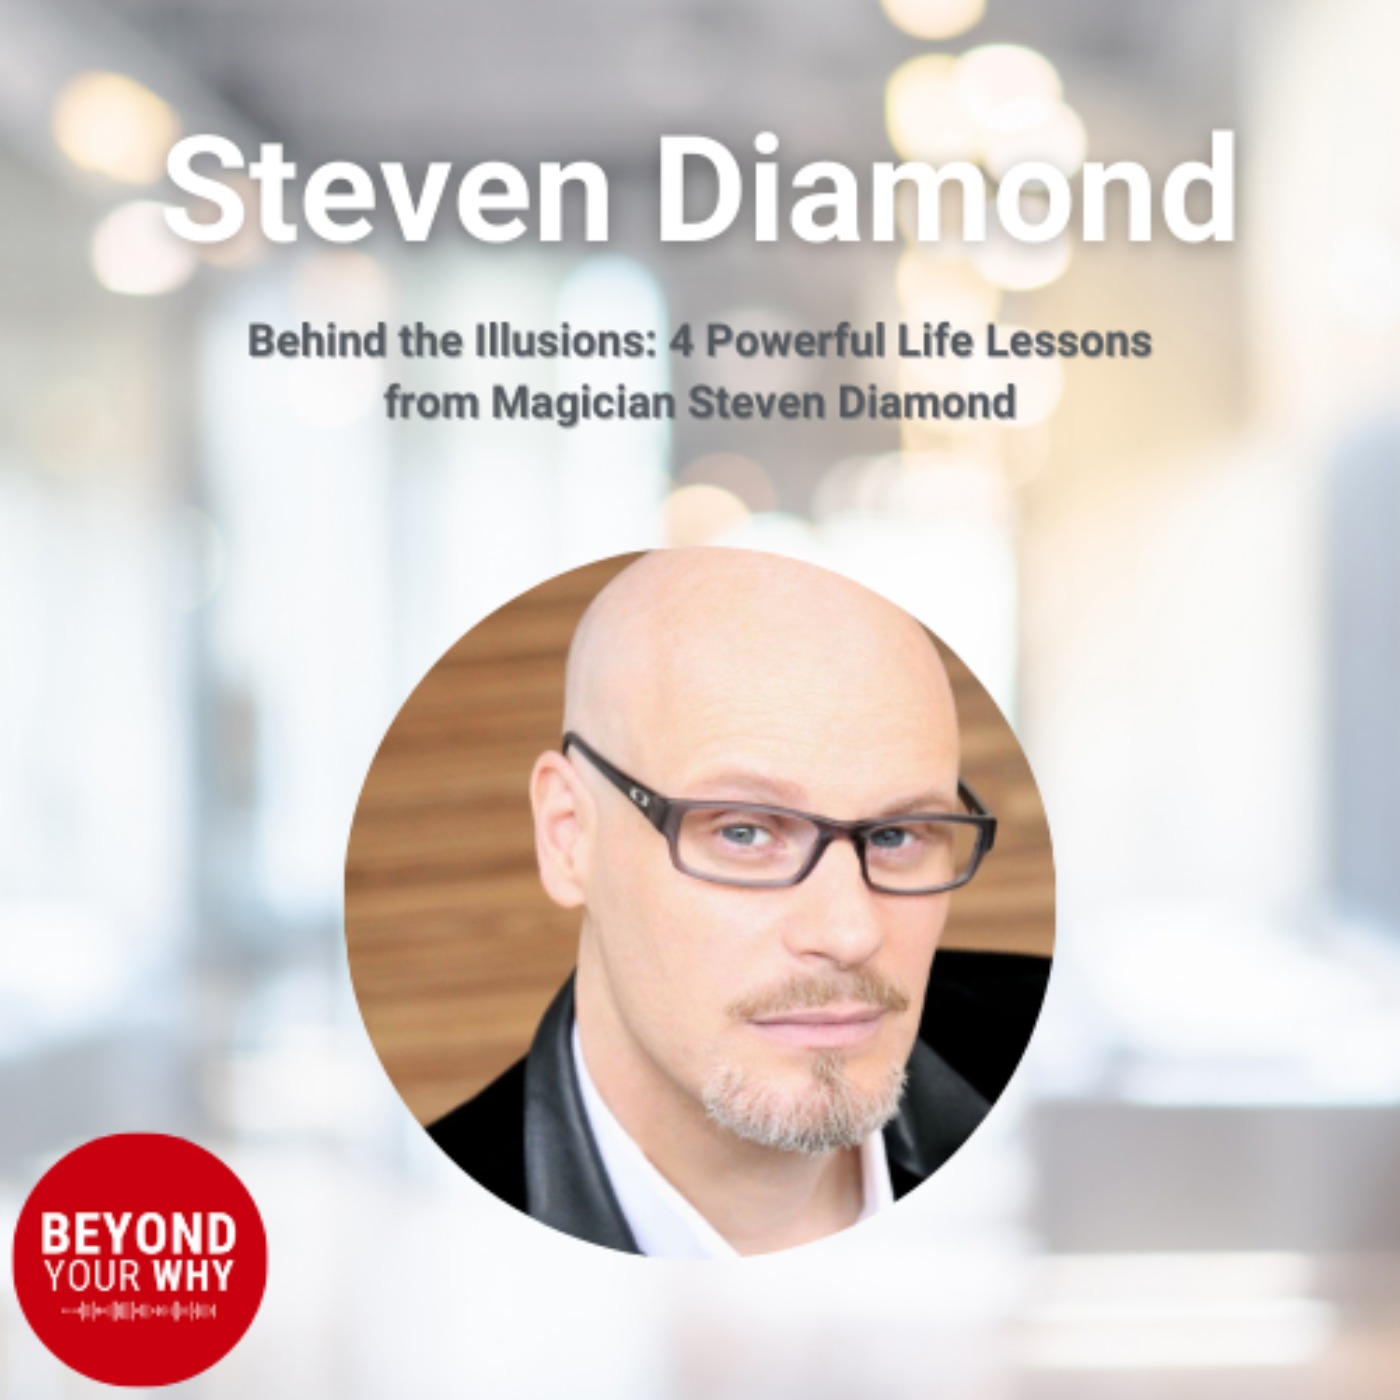 Behind the Illusions: 4 Powerful Life Lessons from Magician Steven Diamond